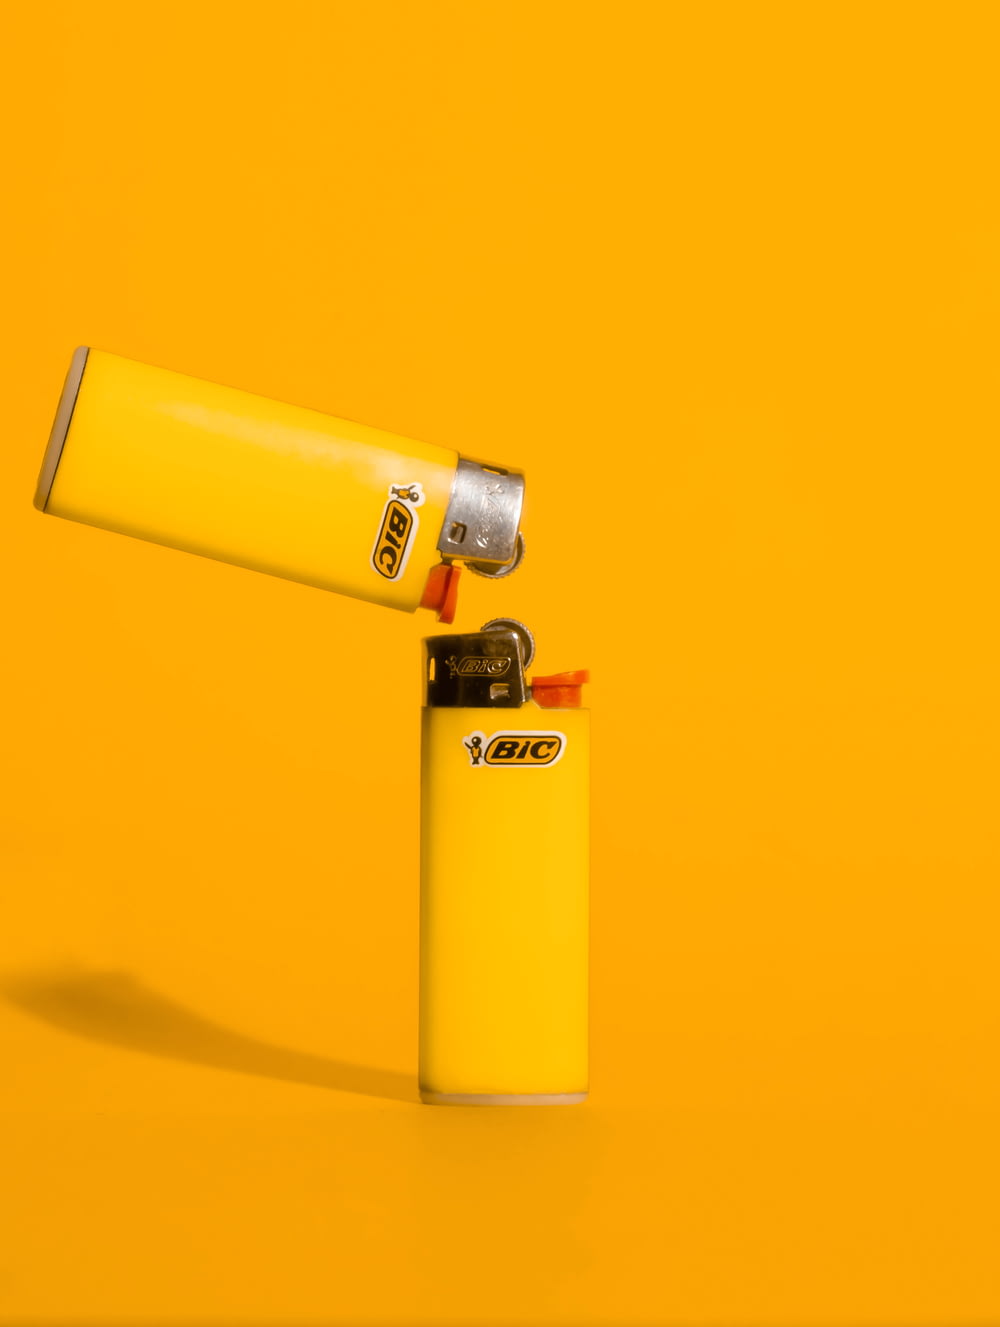 a yellow lighter sitting on top of a yellow surface